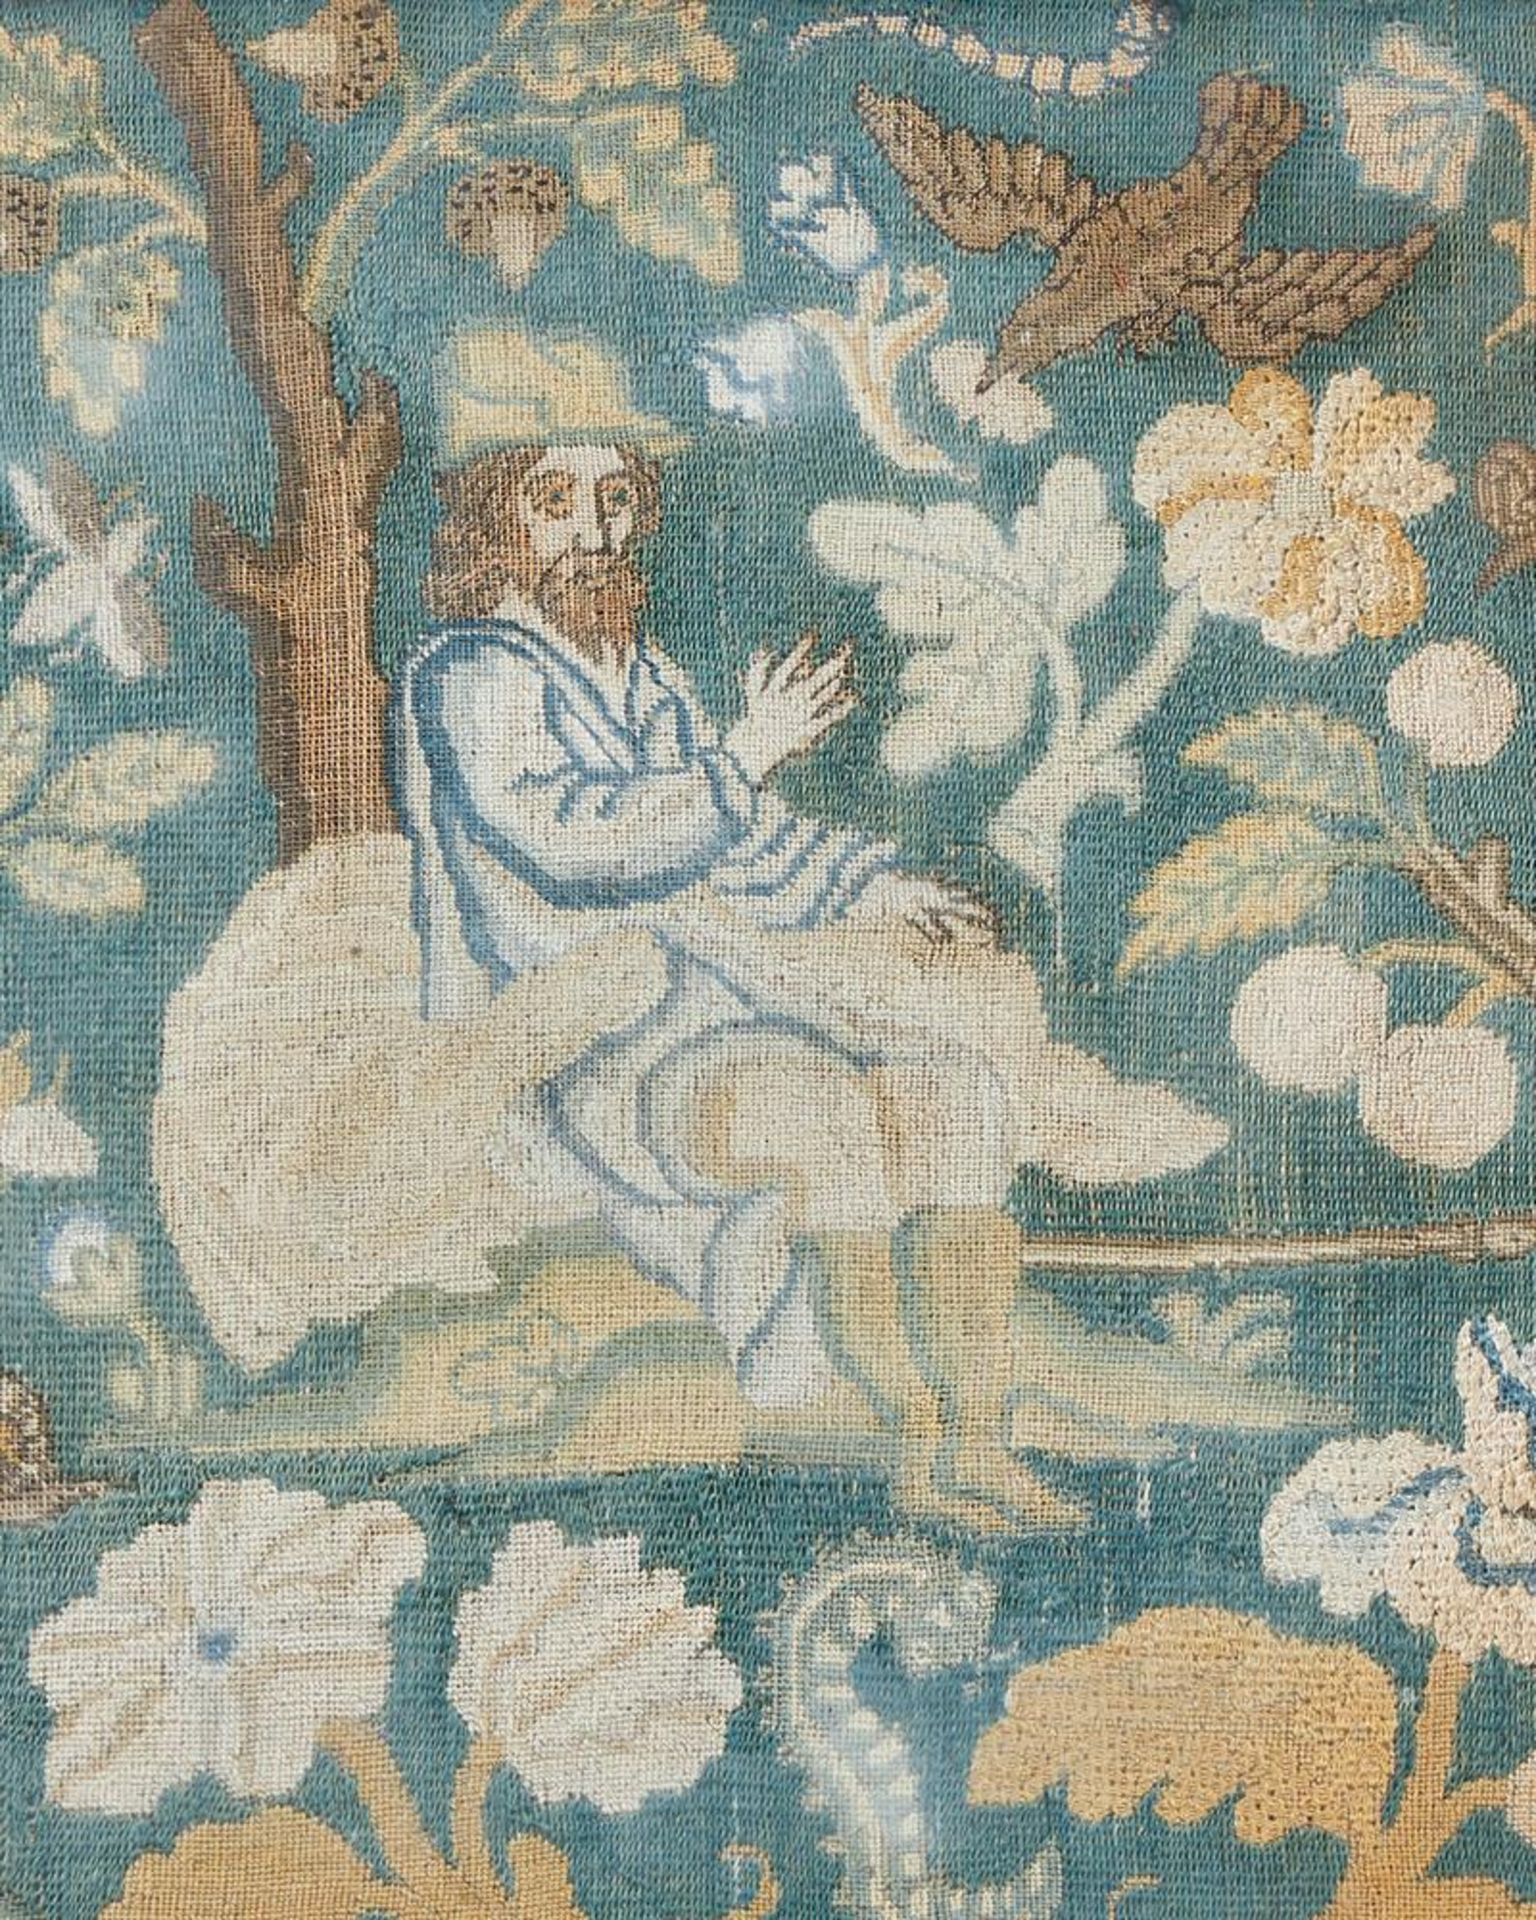 A NEEDLEWORK PICTURE, EARLY 18TH CENTURY - Image 2 of 3